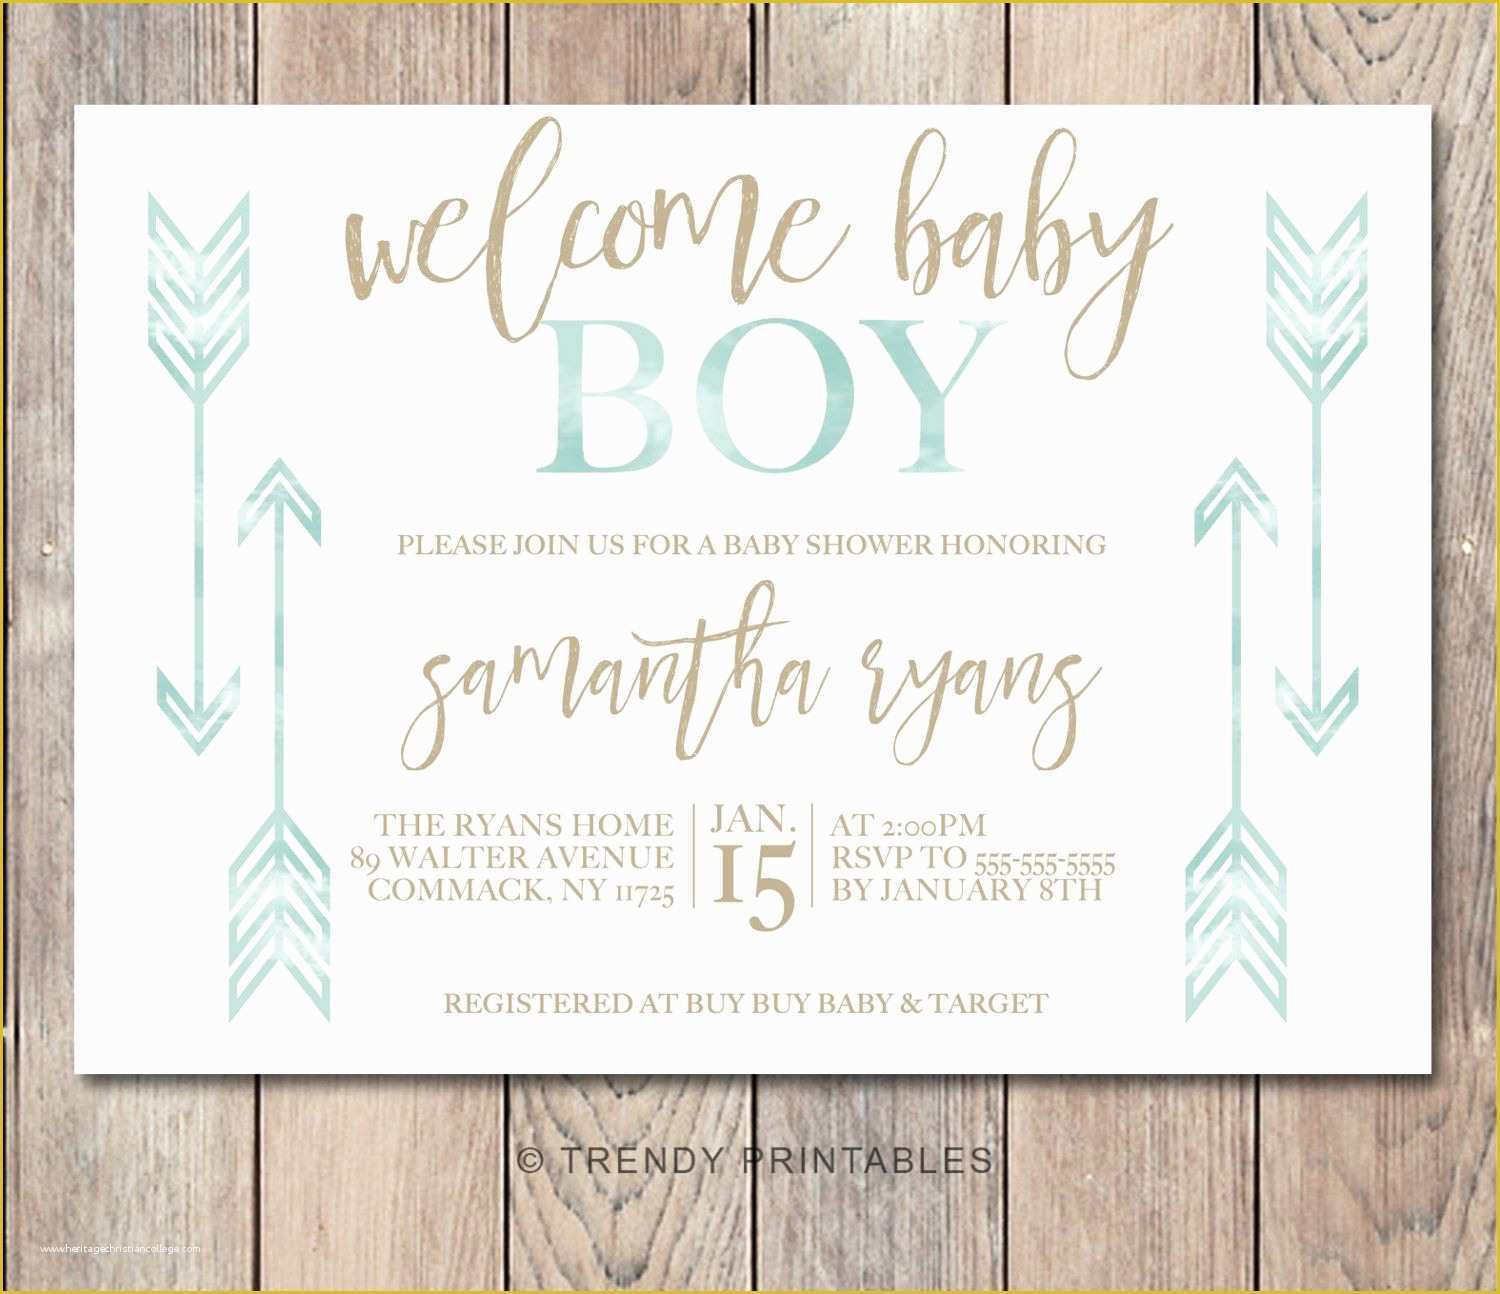 Baby Boy Baby Shower Invitations Templates Free Of Blank Invitation Templates Free for Word Free Line